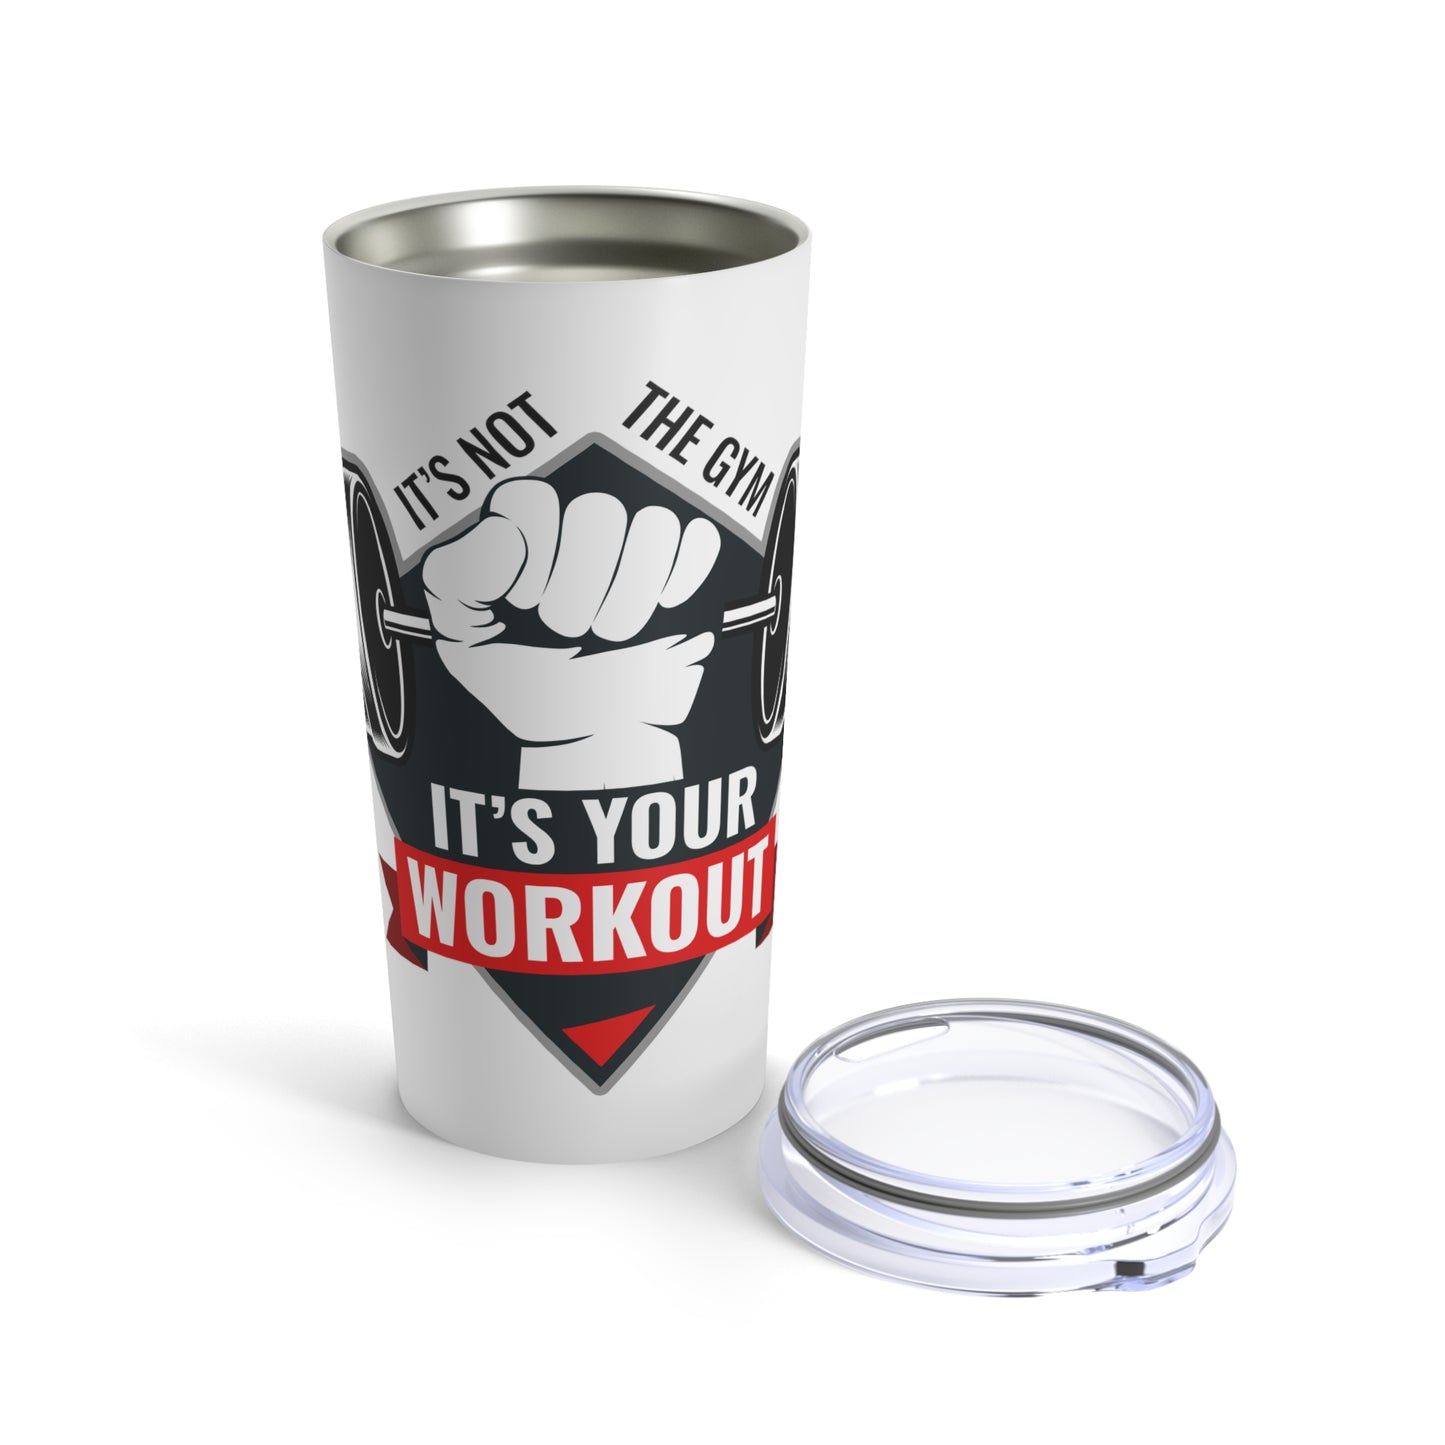 It’s Not The Gym It's Your Workout Insuluxe Tumbler